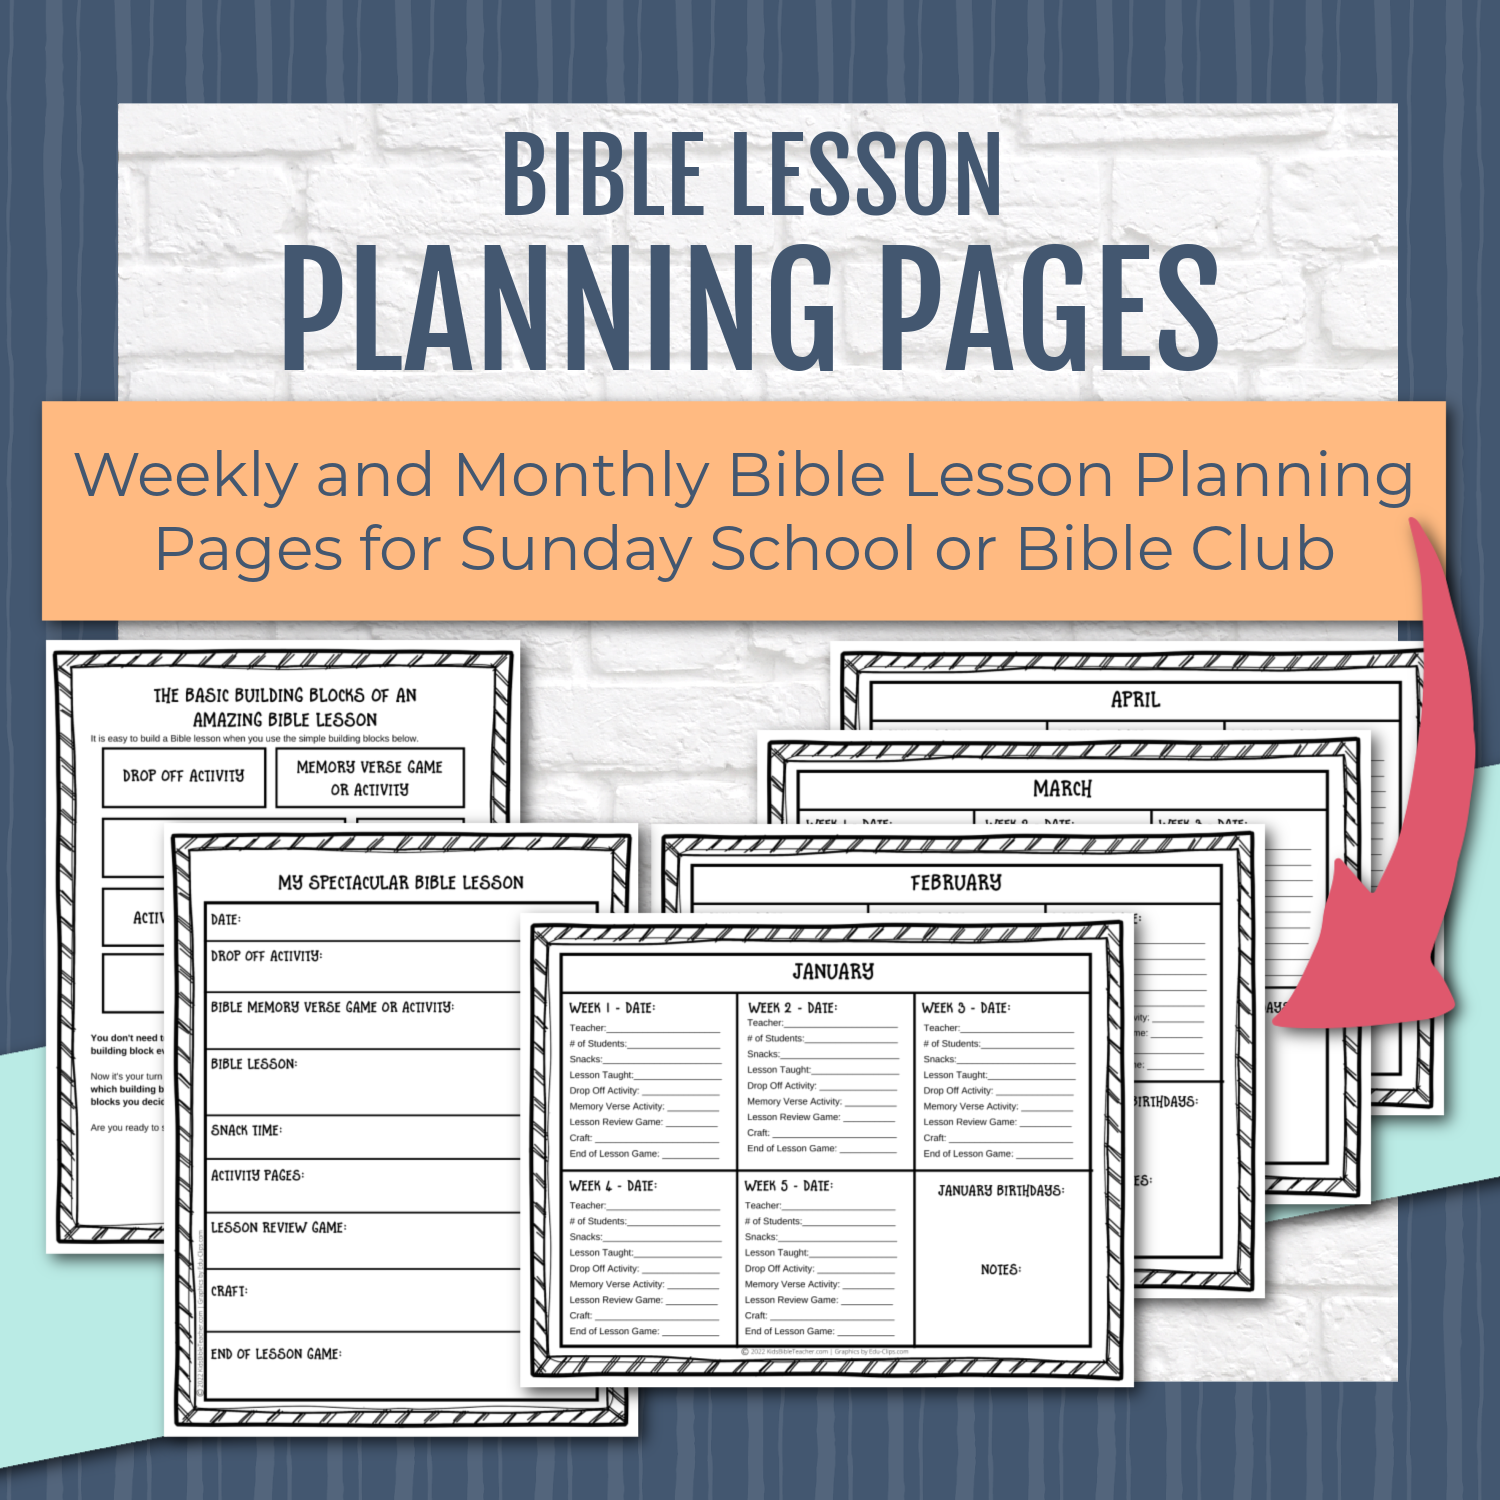 Weekly and Monthly Bible Lesson Planning Pages